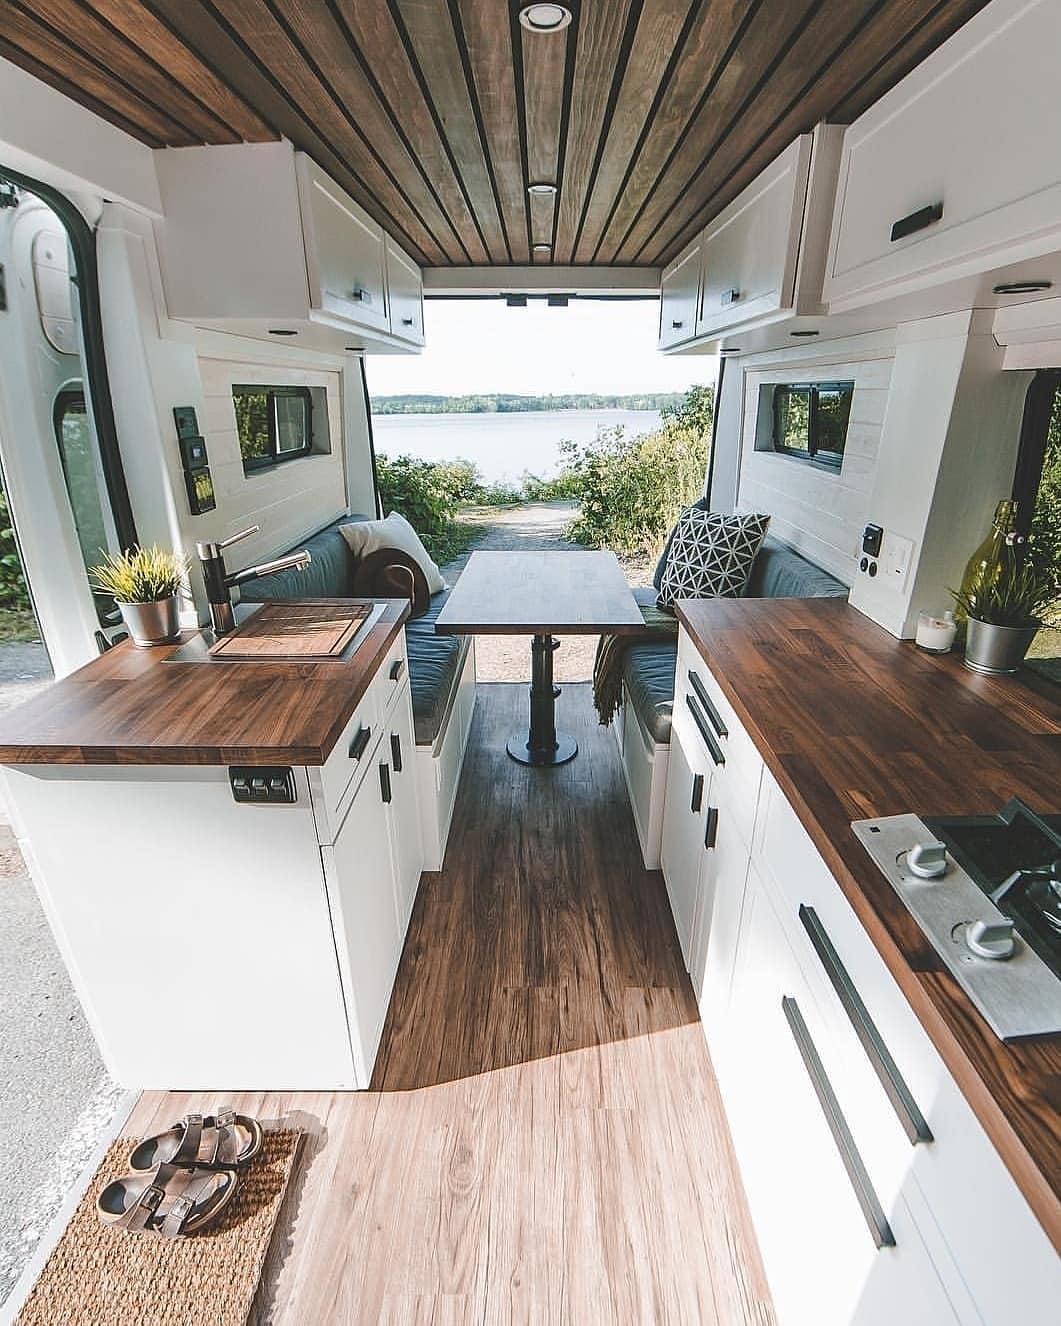 Van dining area with white cabinets and brown counters.Photo by Instagram user @vanlifevirals